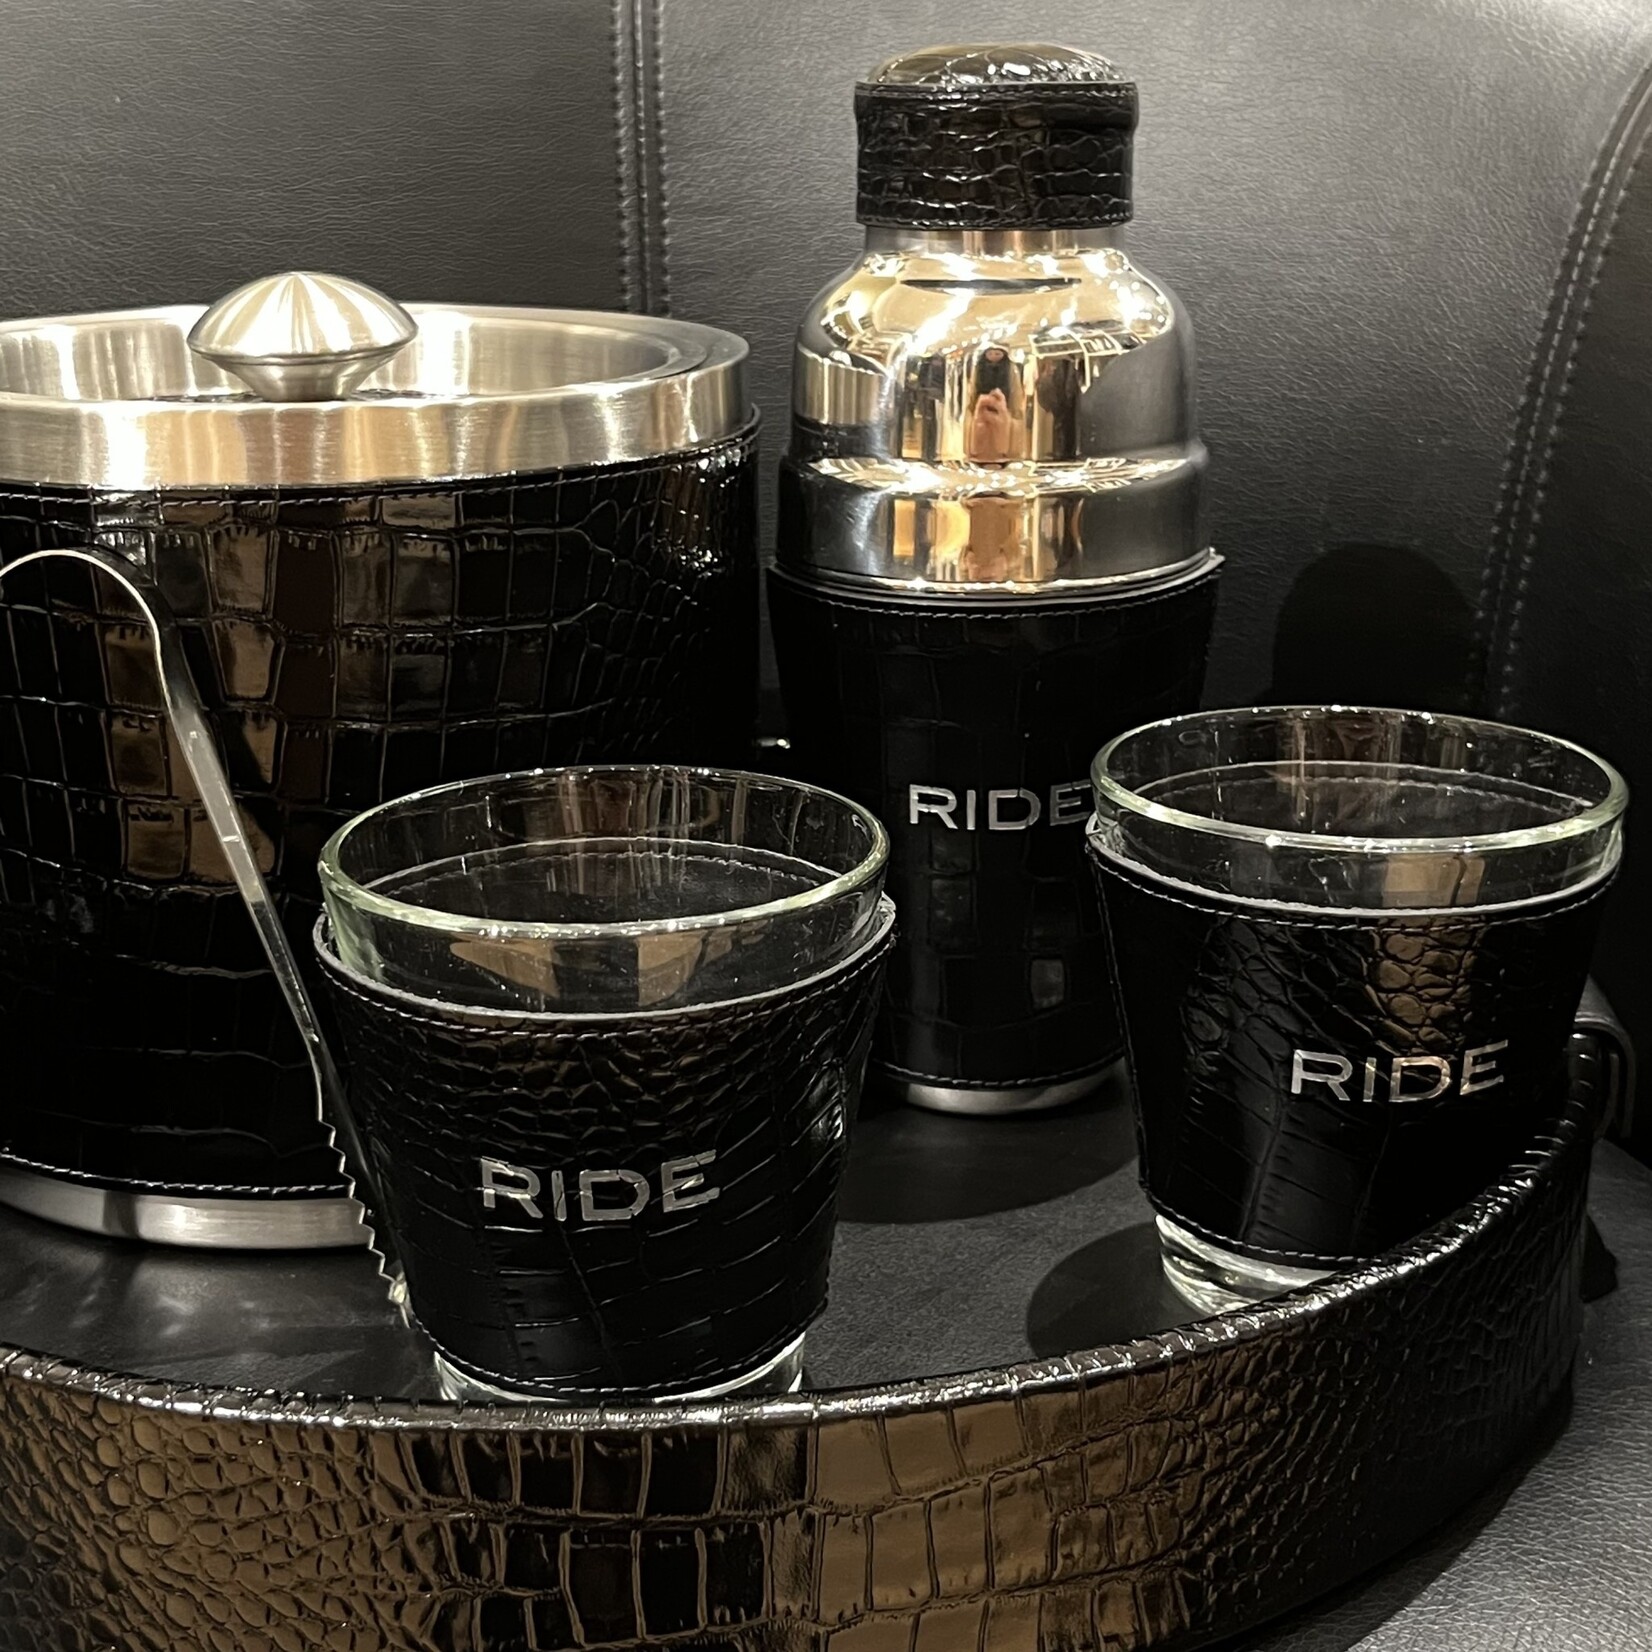 Graphic Image RIDE Printed Leather Wrapped Drinking  Glasses, silver embossed, boxed set of 2